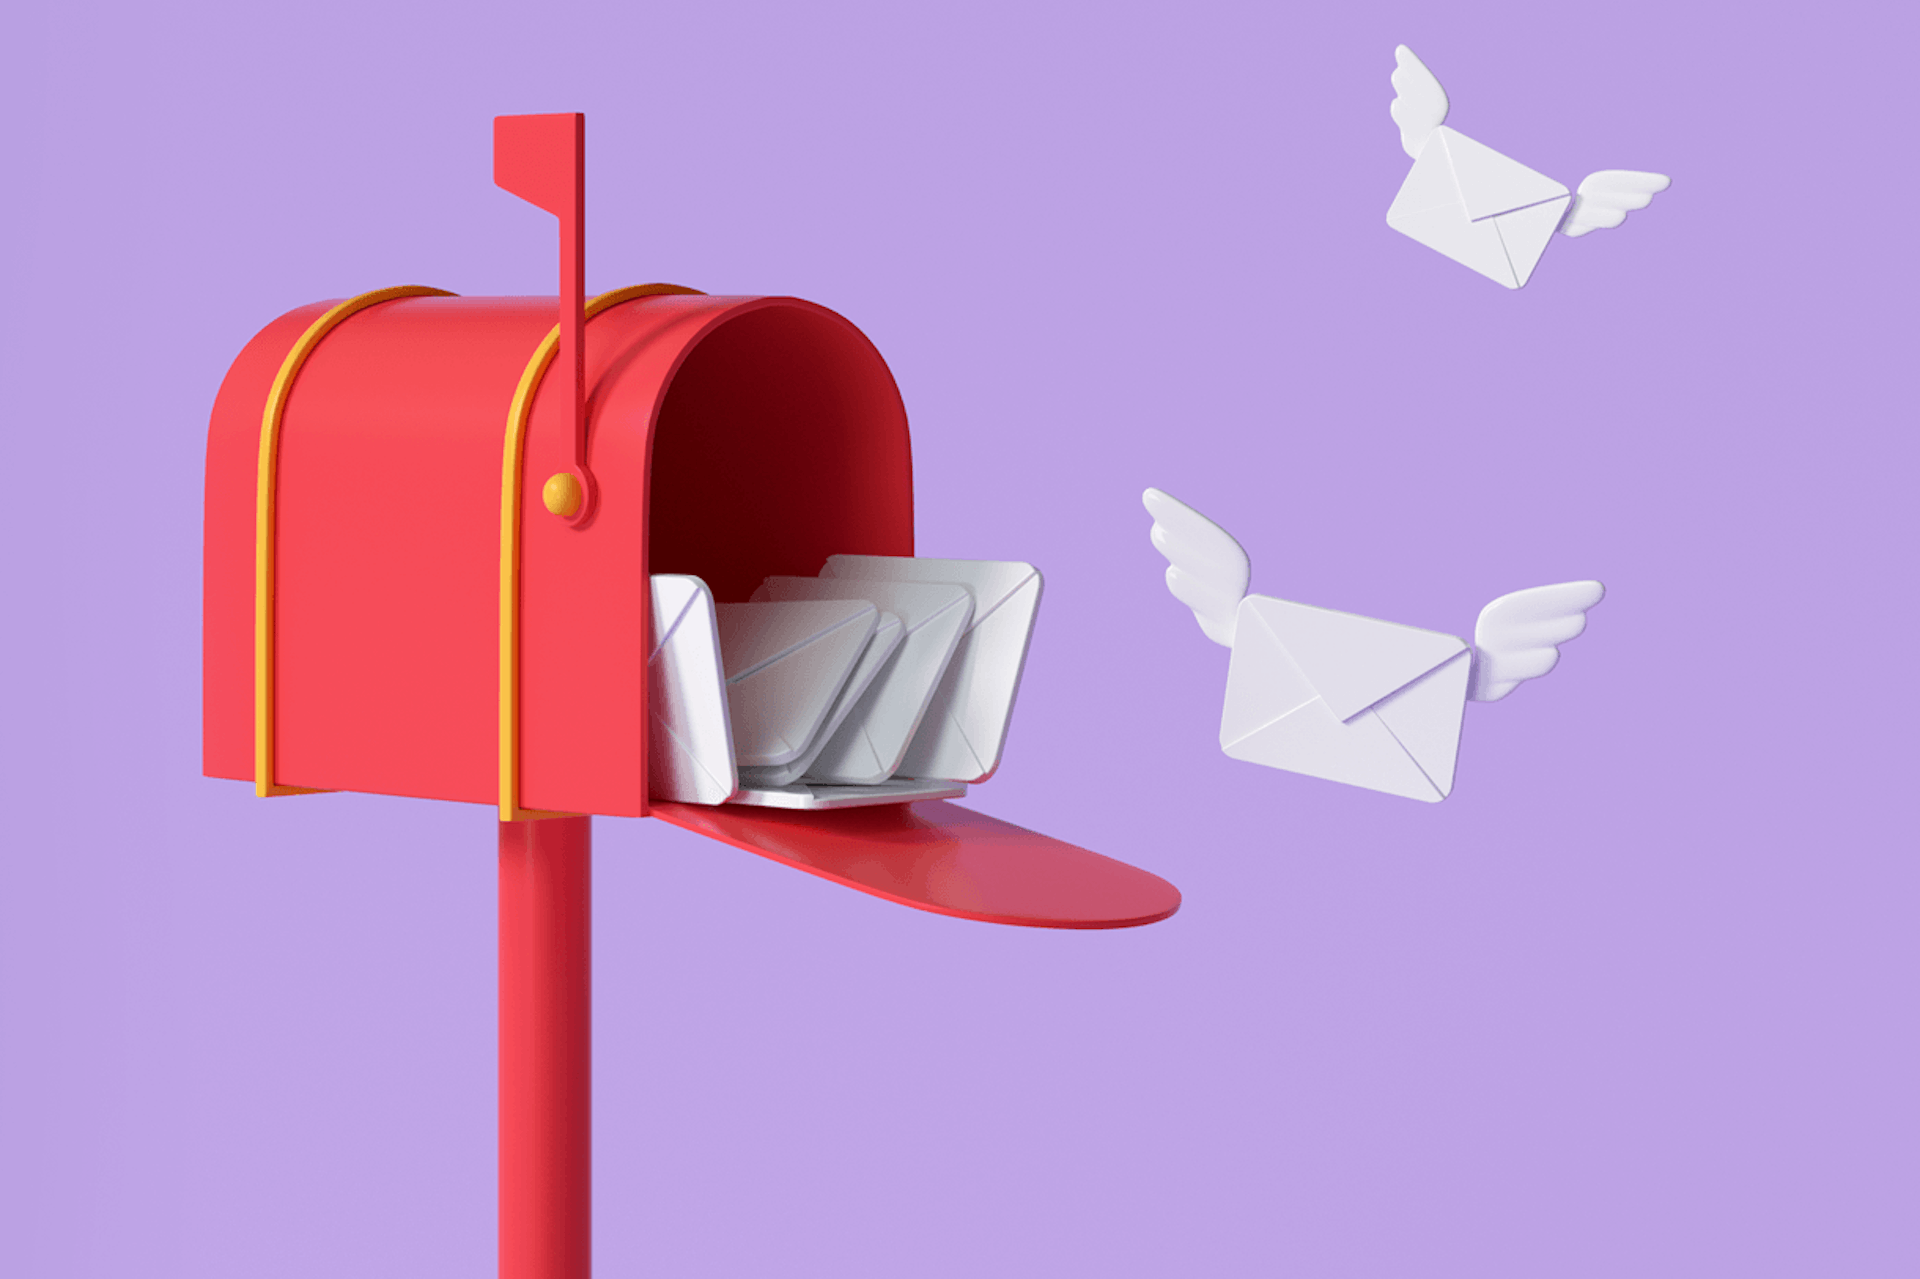 Illustration showing a red mailbox open and fully of white envelopes, two envelopes flying away, on a pastel purple background. Pitching a press release blog post.